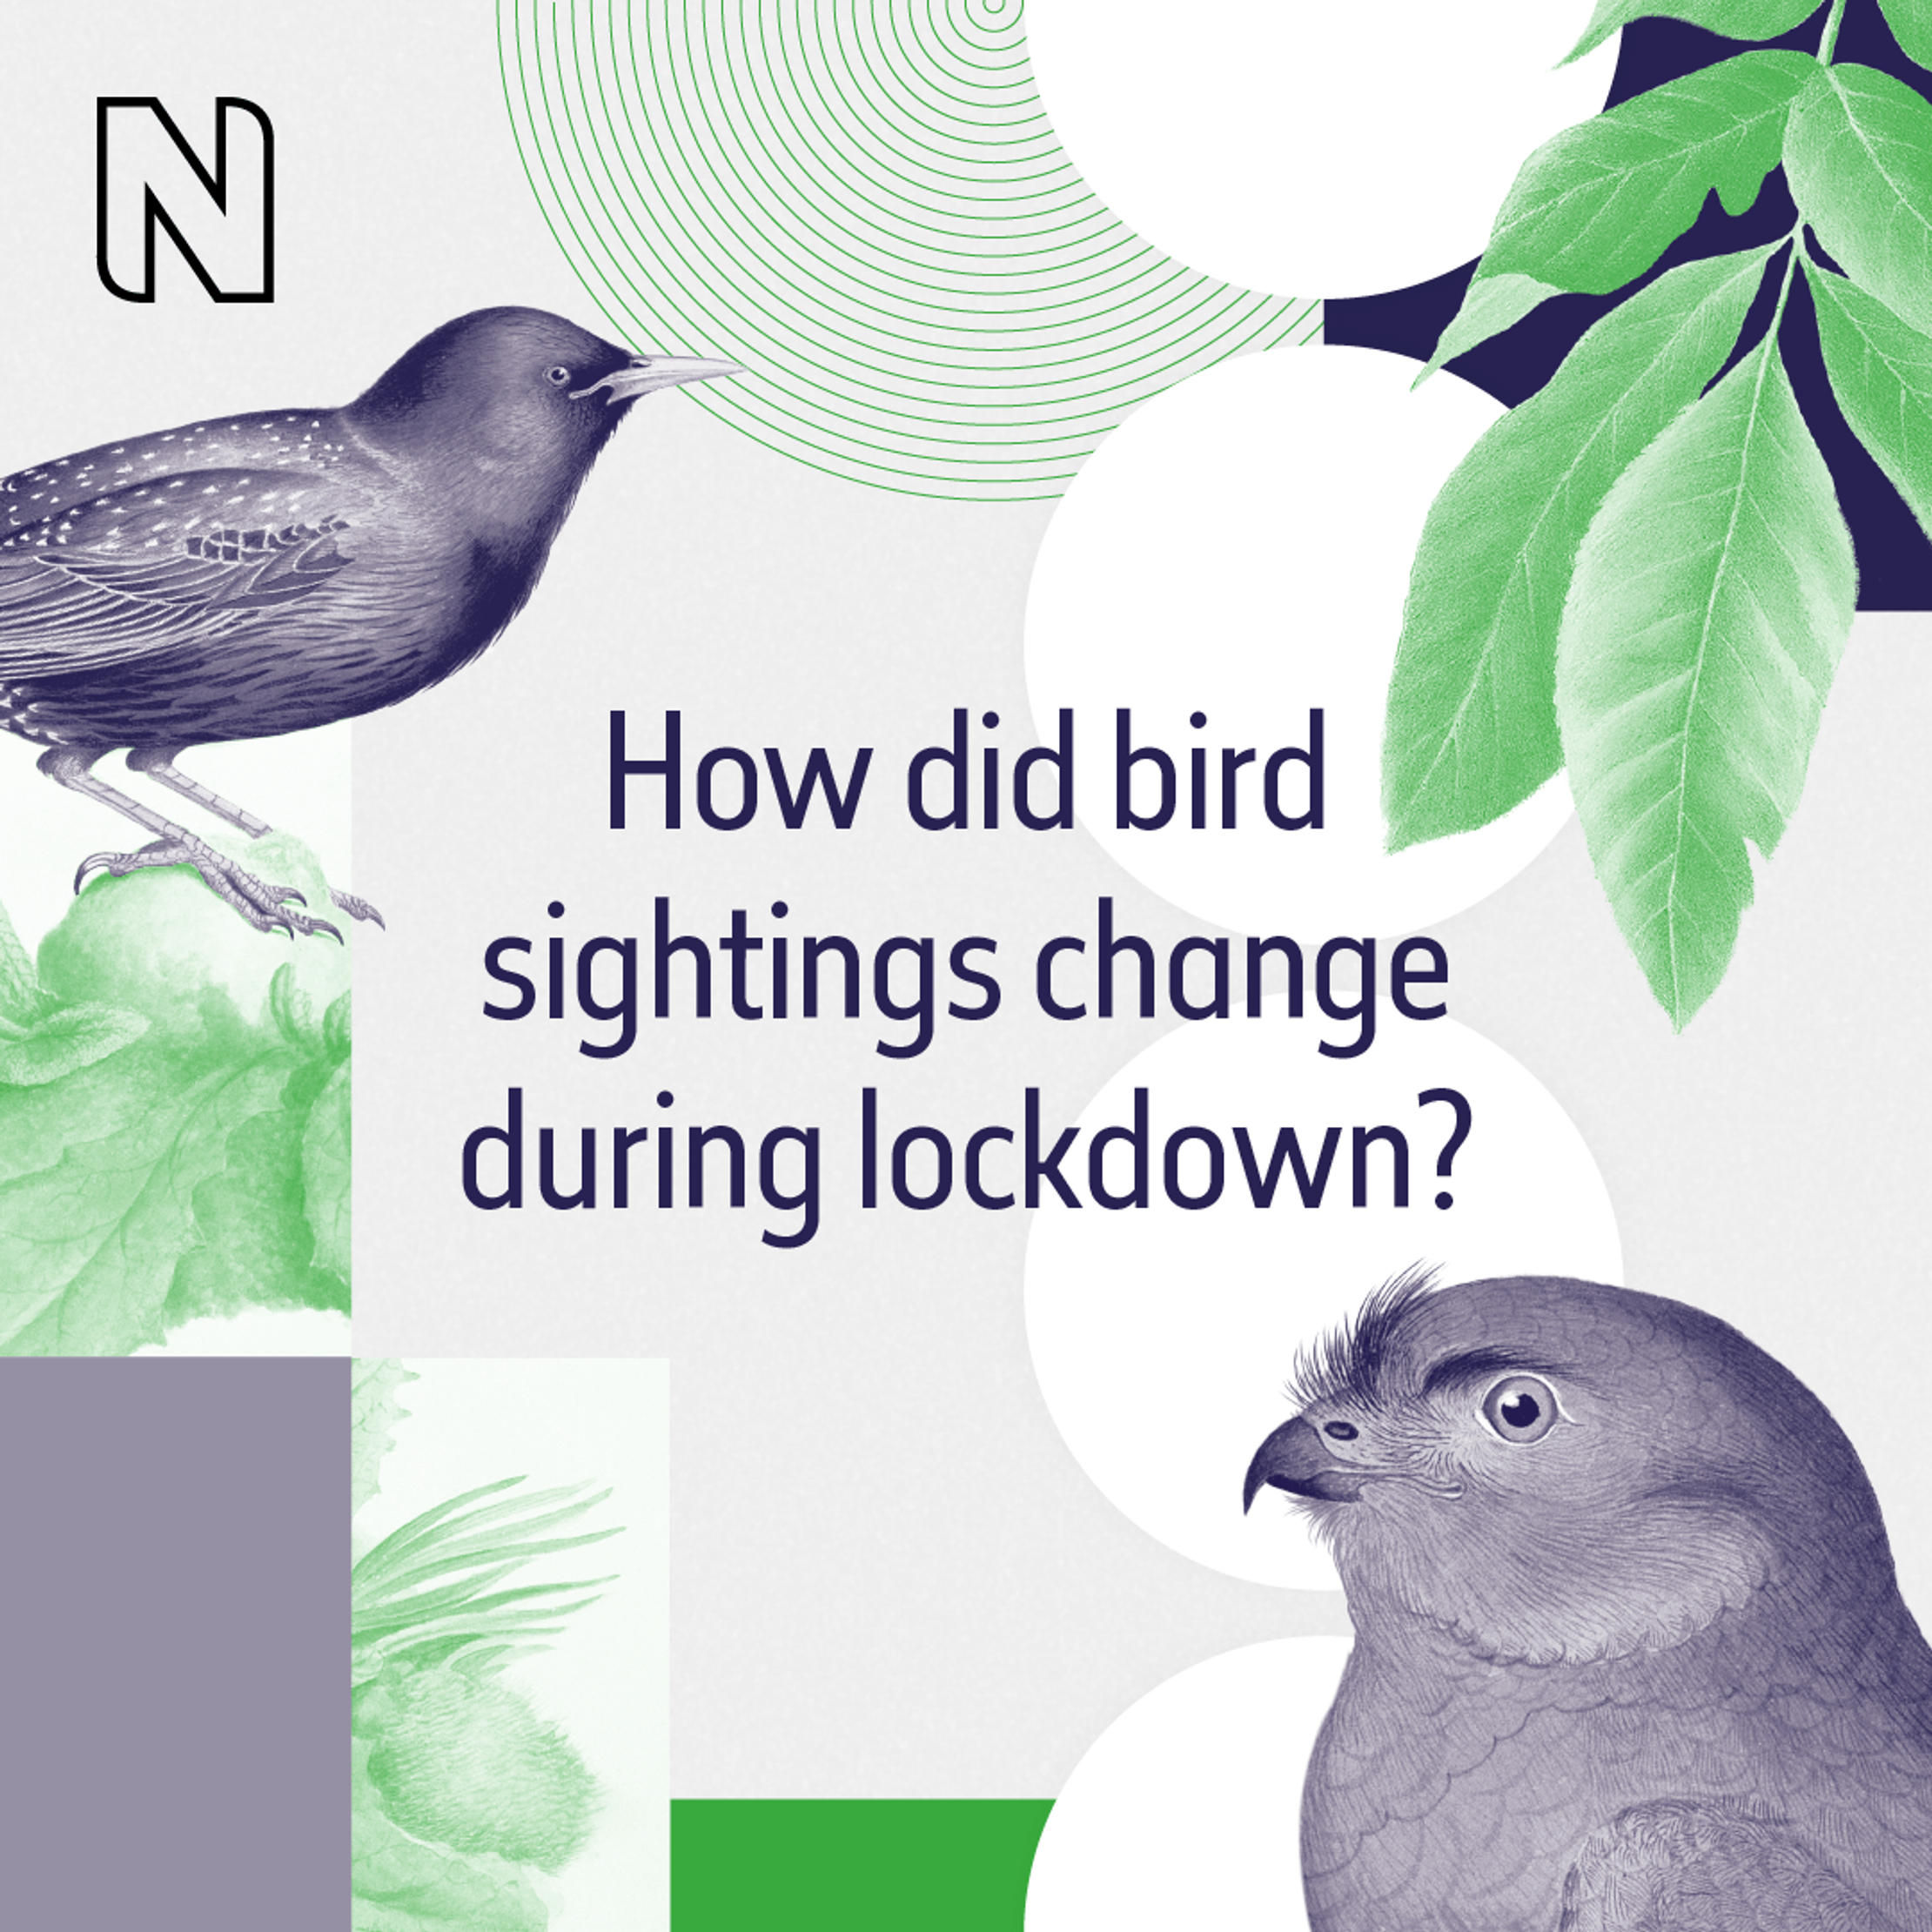 A square graphic with the text 'How did bird sightings change during lockdown?' It includes two illustrations of birds from the Natural History Museum's image library. Other collaged graphics include leaves and circles.